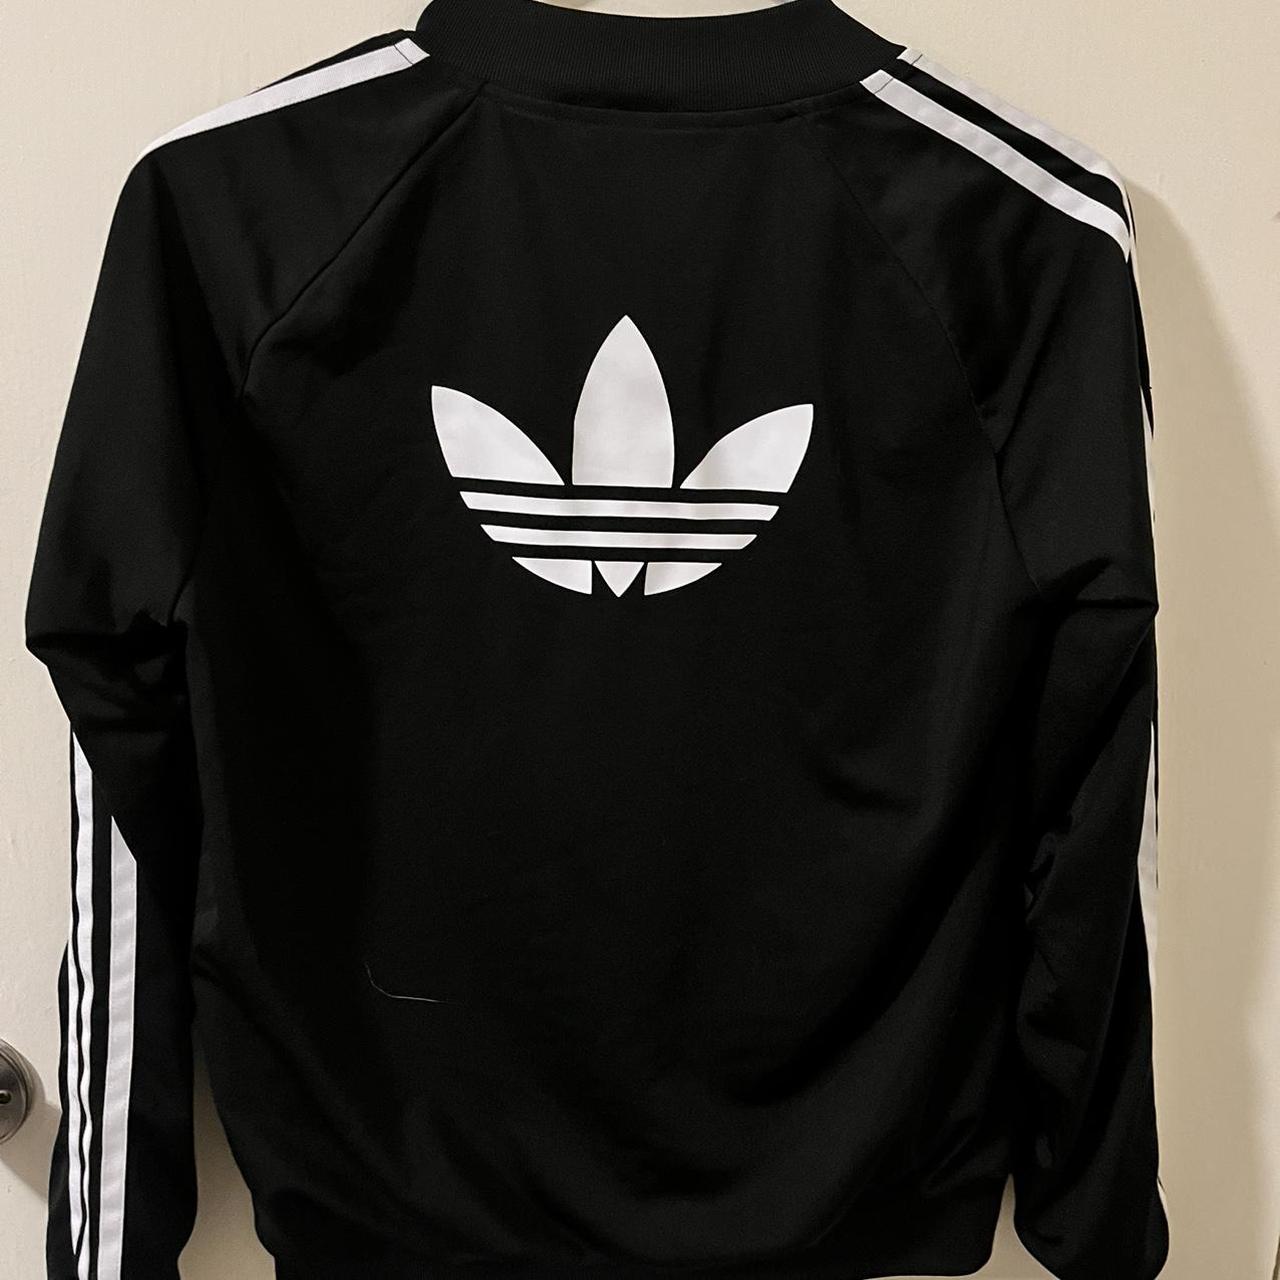 Adidas Jacket The thing on the zipper broke off,... - Depop